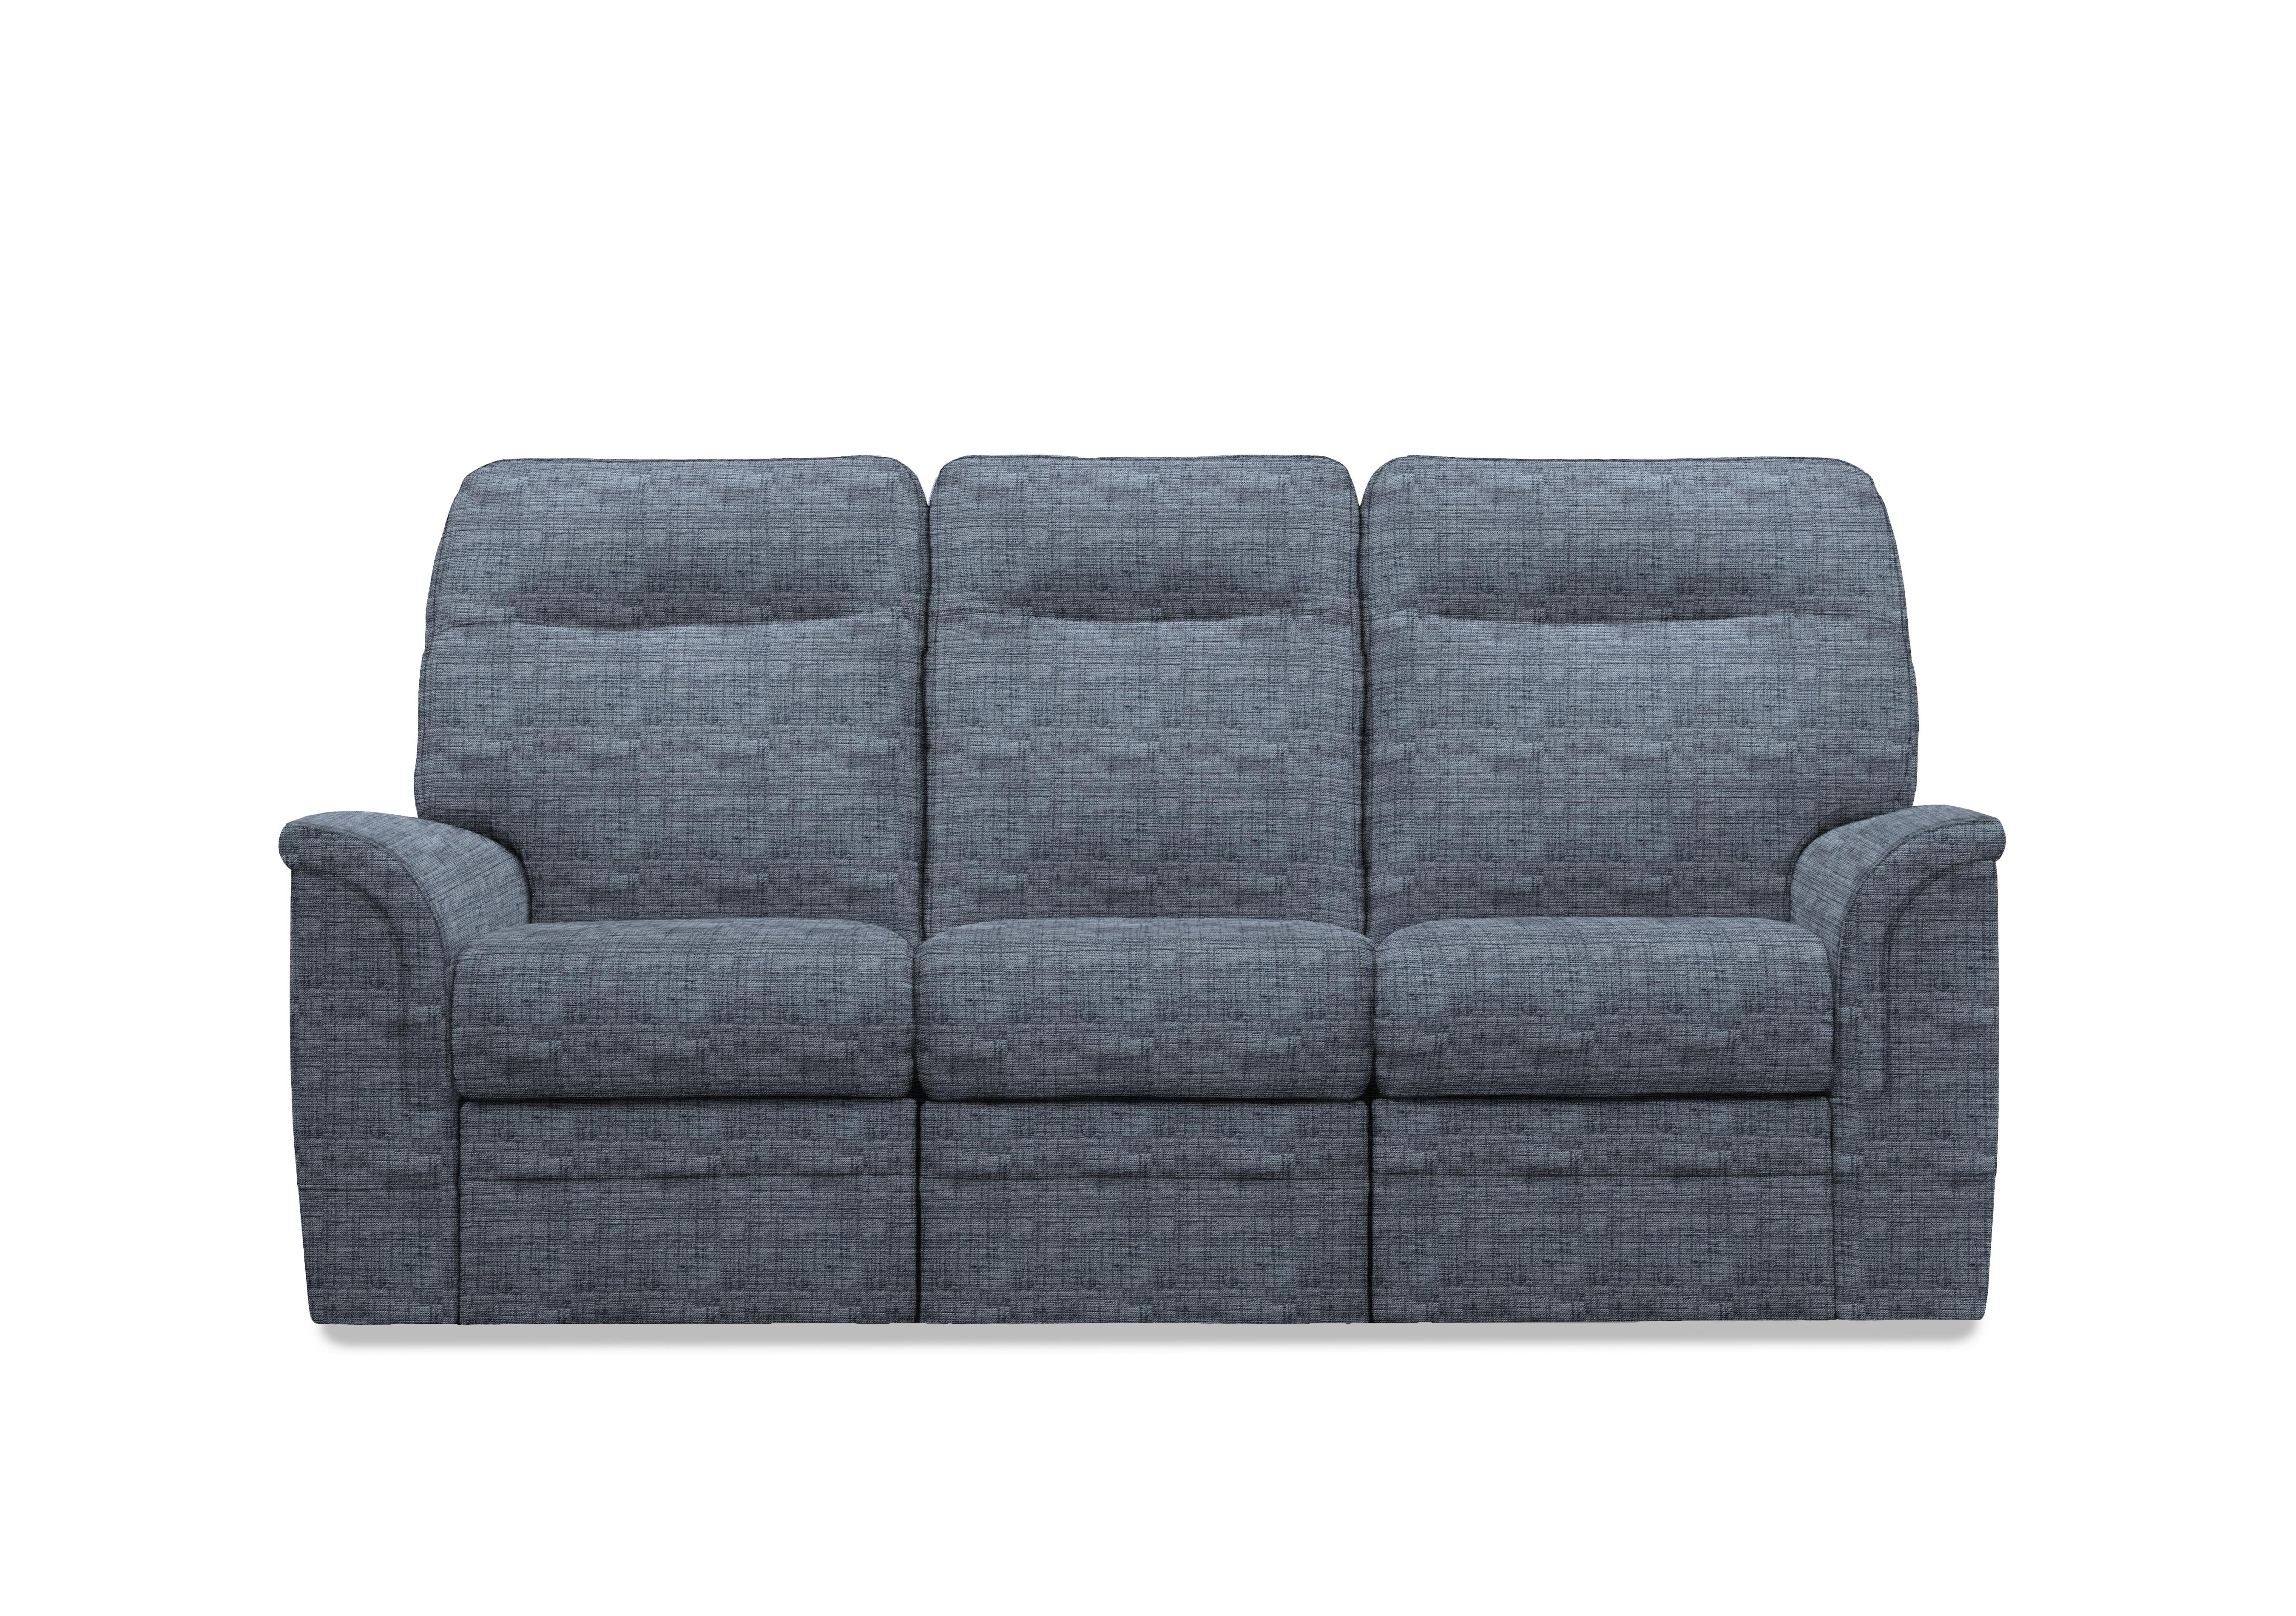 Hudson 23 Fabric 3 Seater Power Recliner Sofa with Power Headrests and Power Lumbar in Dash Blue 001497-0080 on Furniture Village